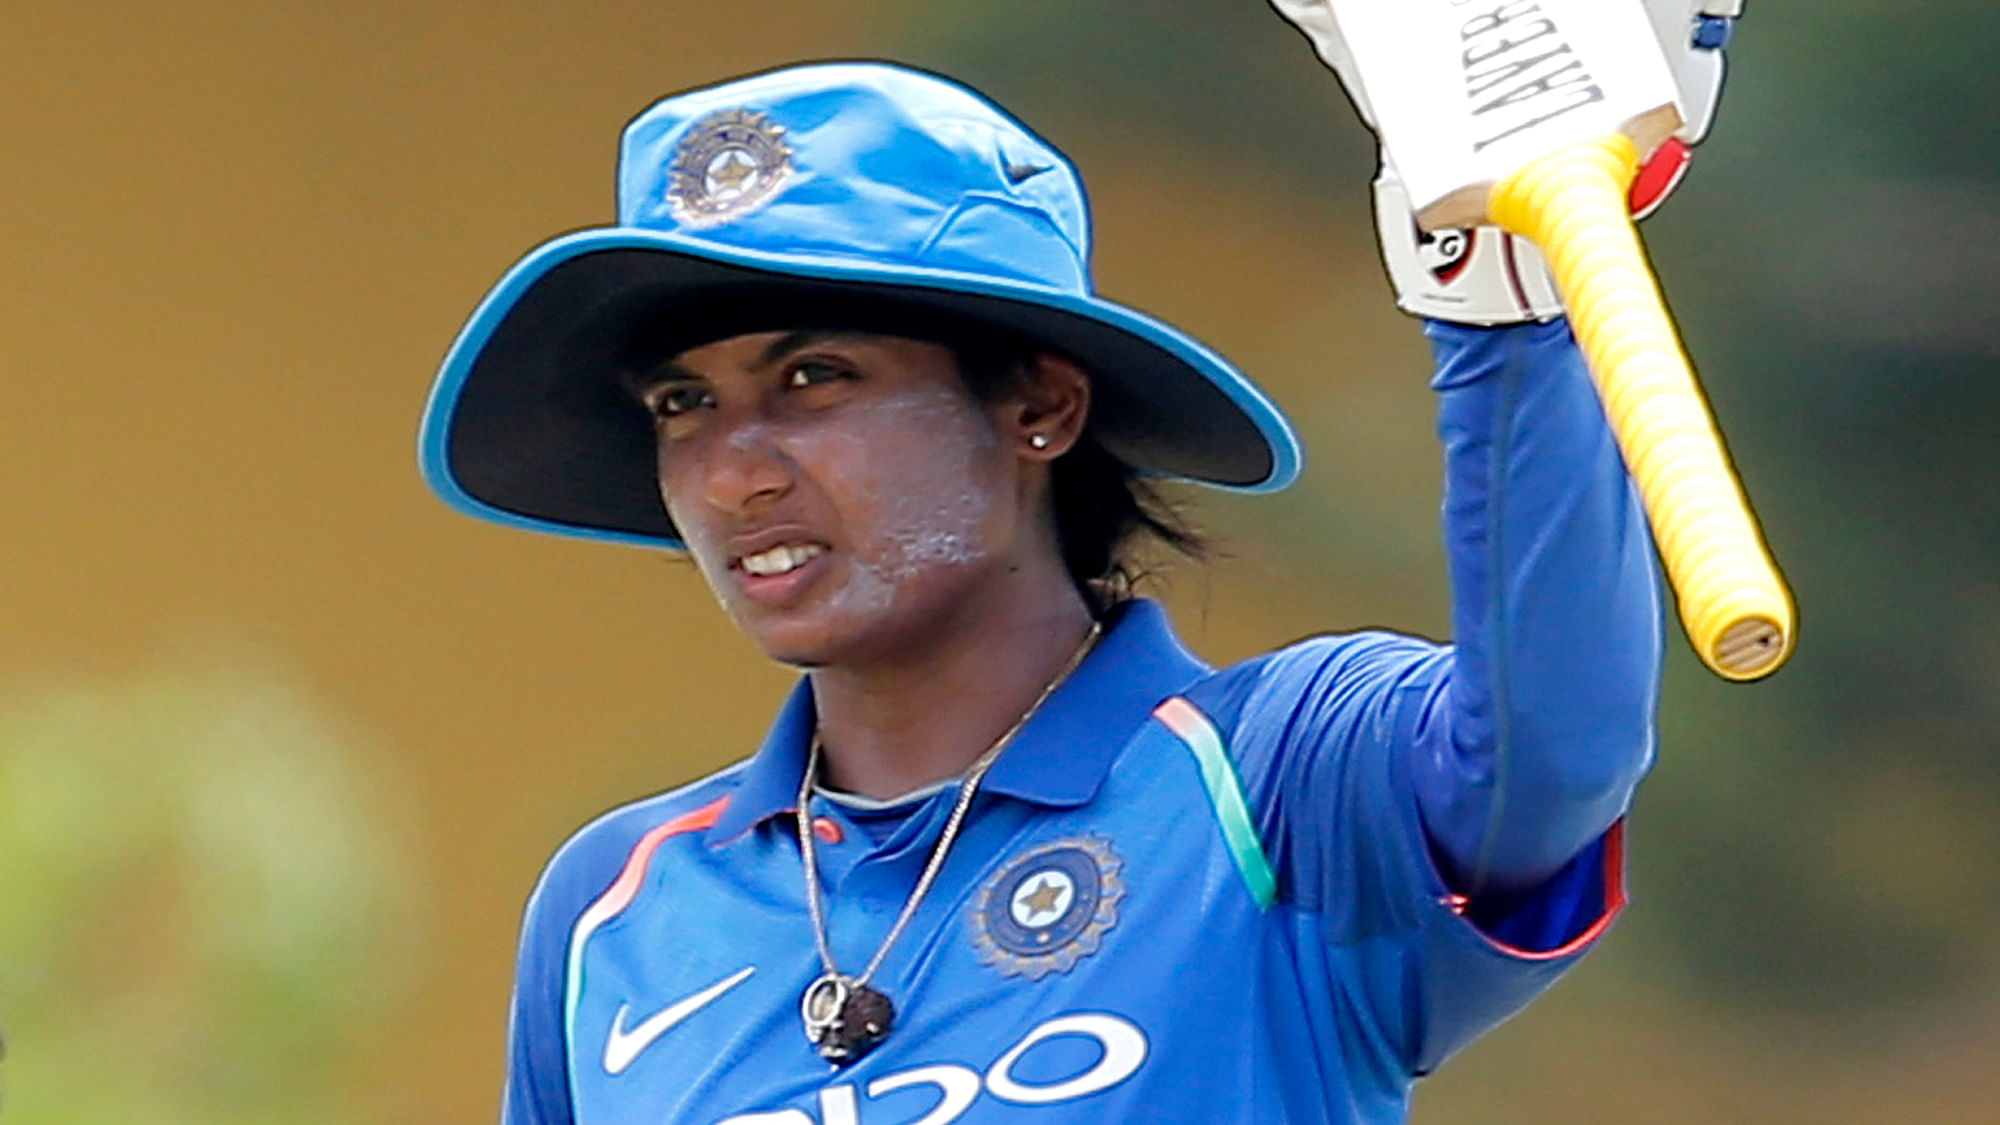 The senior-most member of the Indian women’s team, Mithali Raj, was excluded from the playing XI in the semi-final of the World T20 match against England.